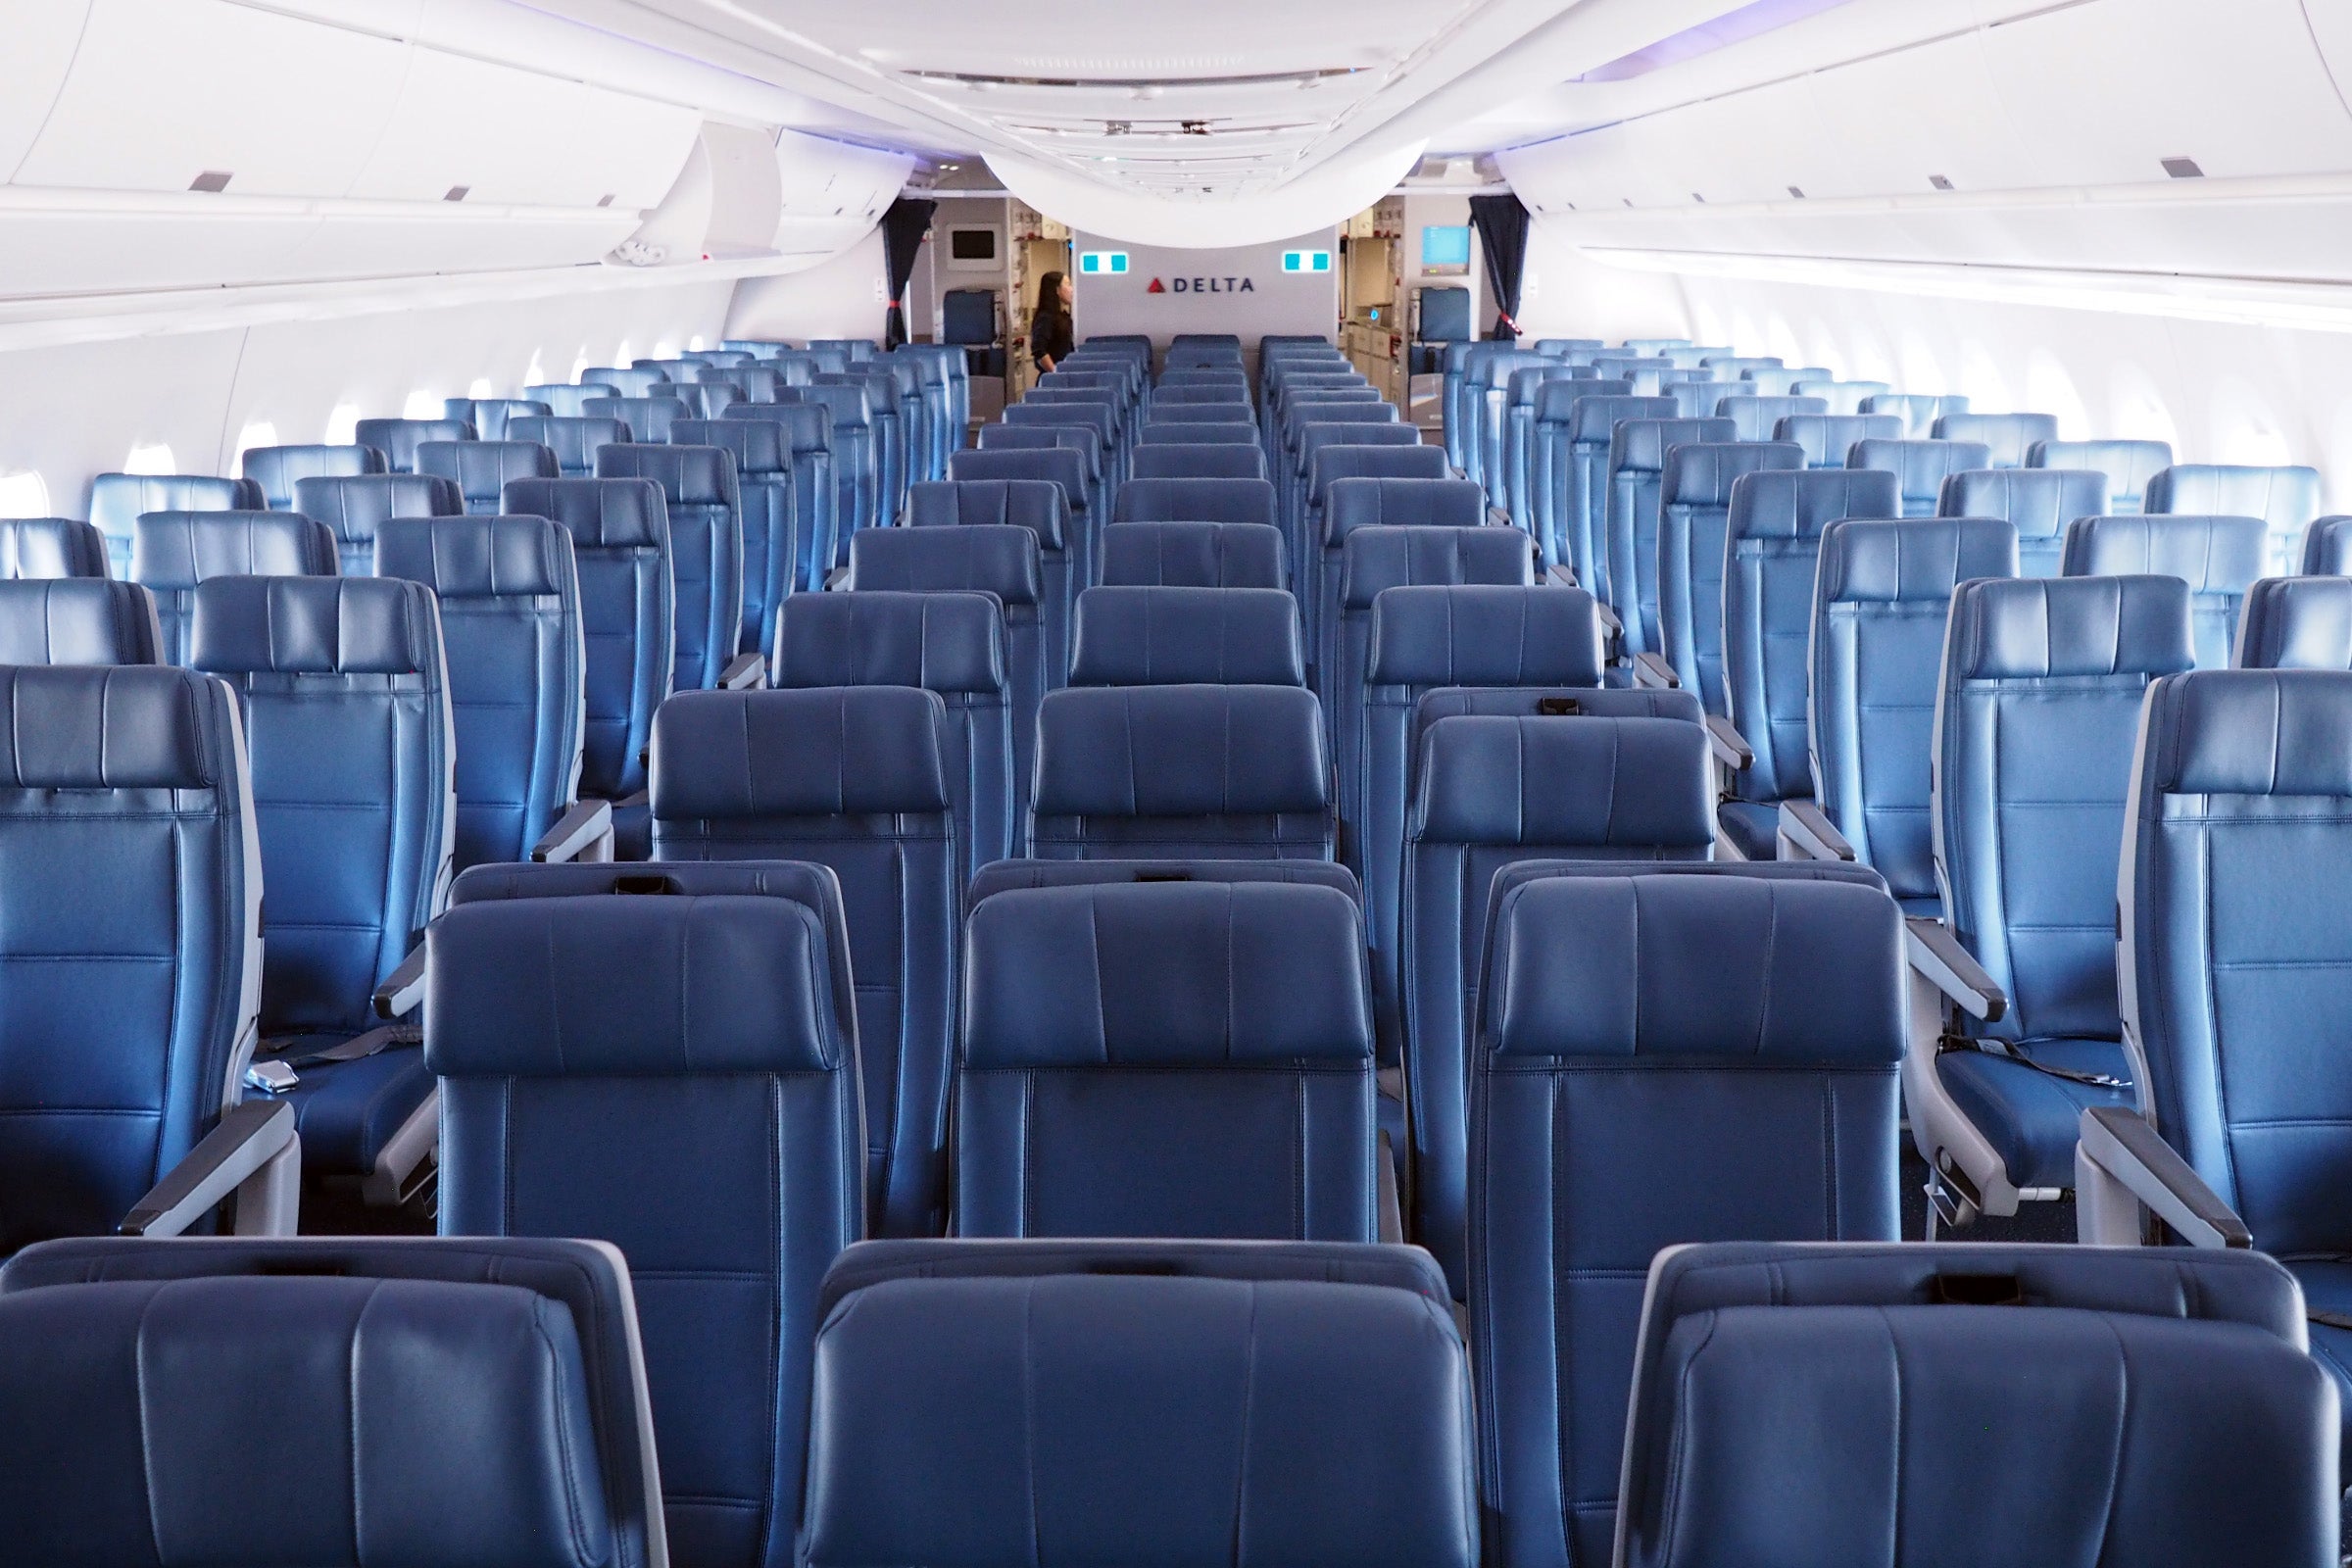 Delta is now the only US airline blocking all middle seats